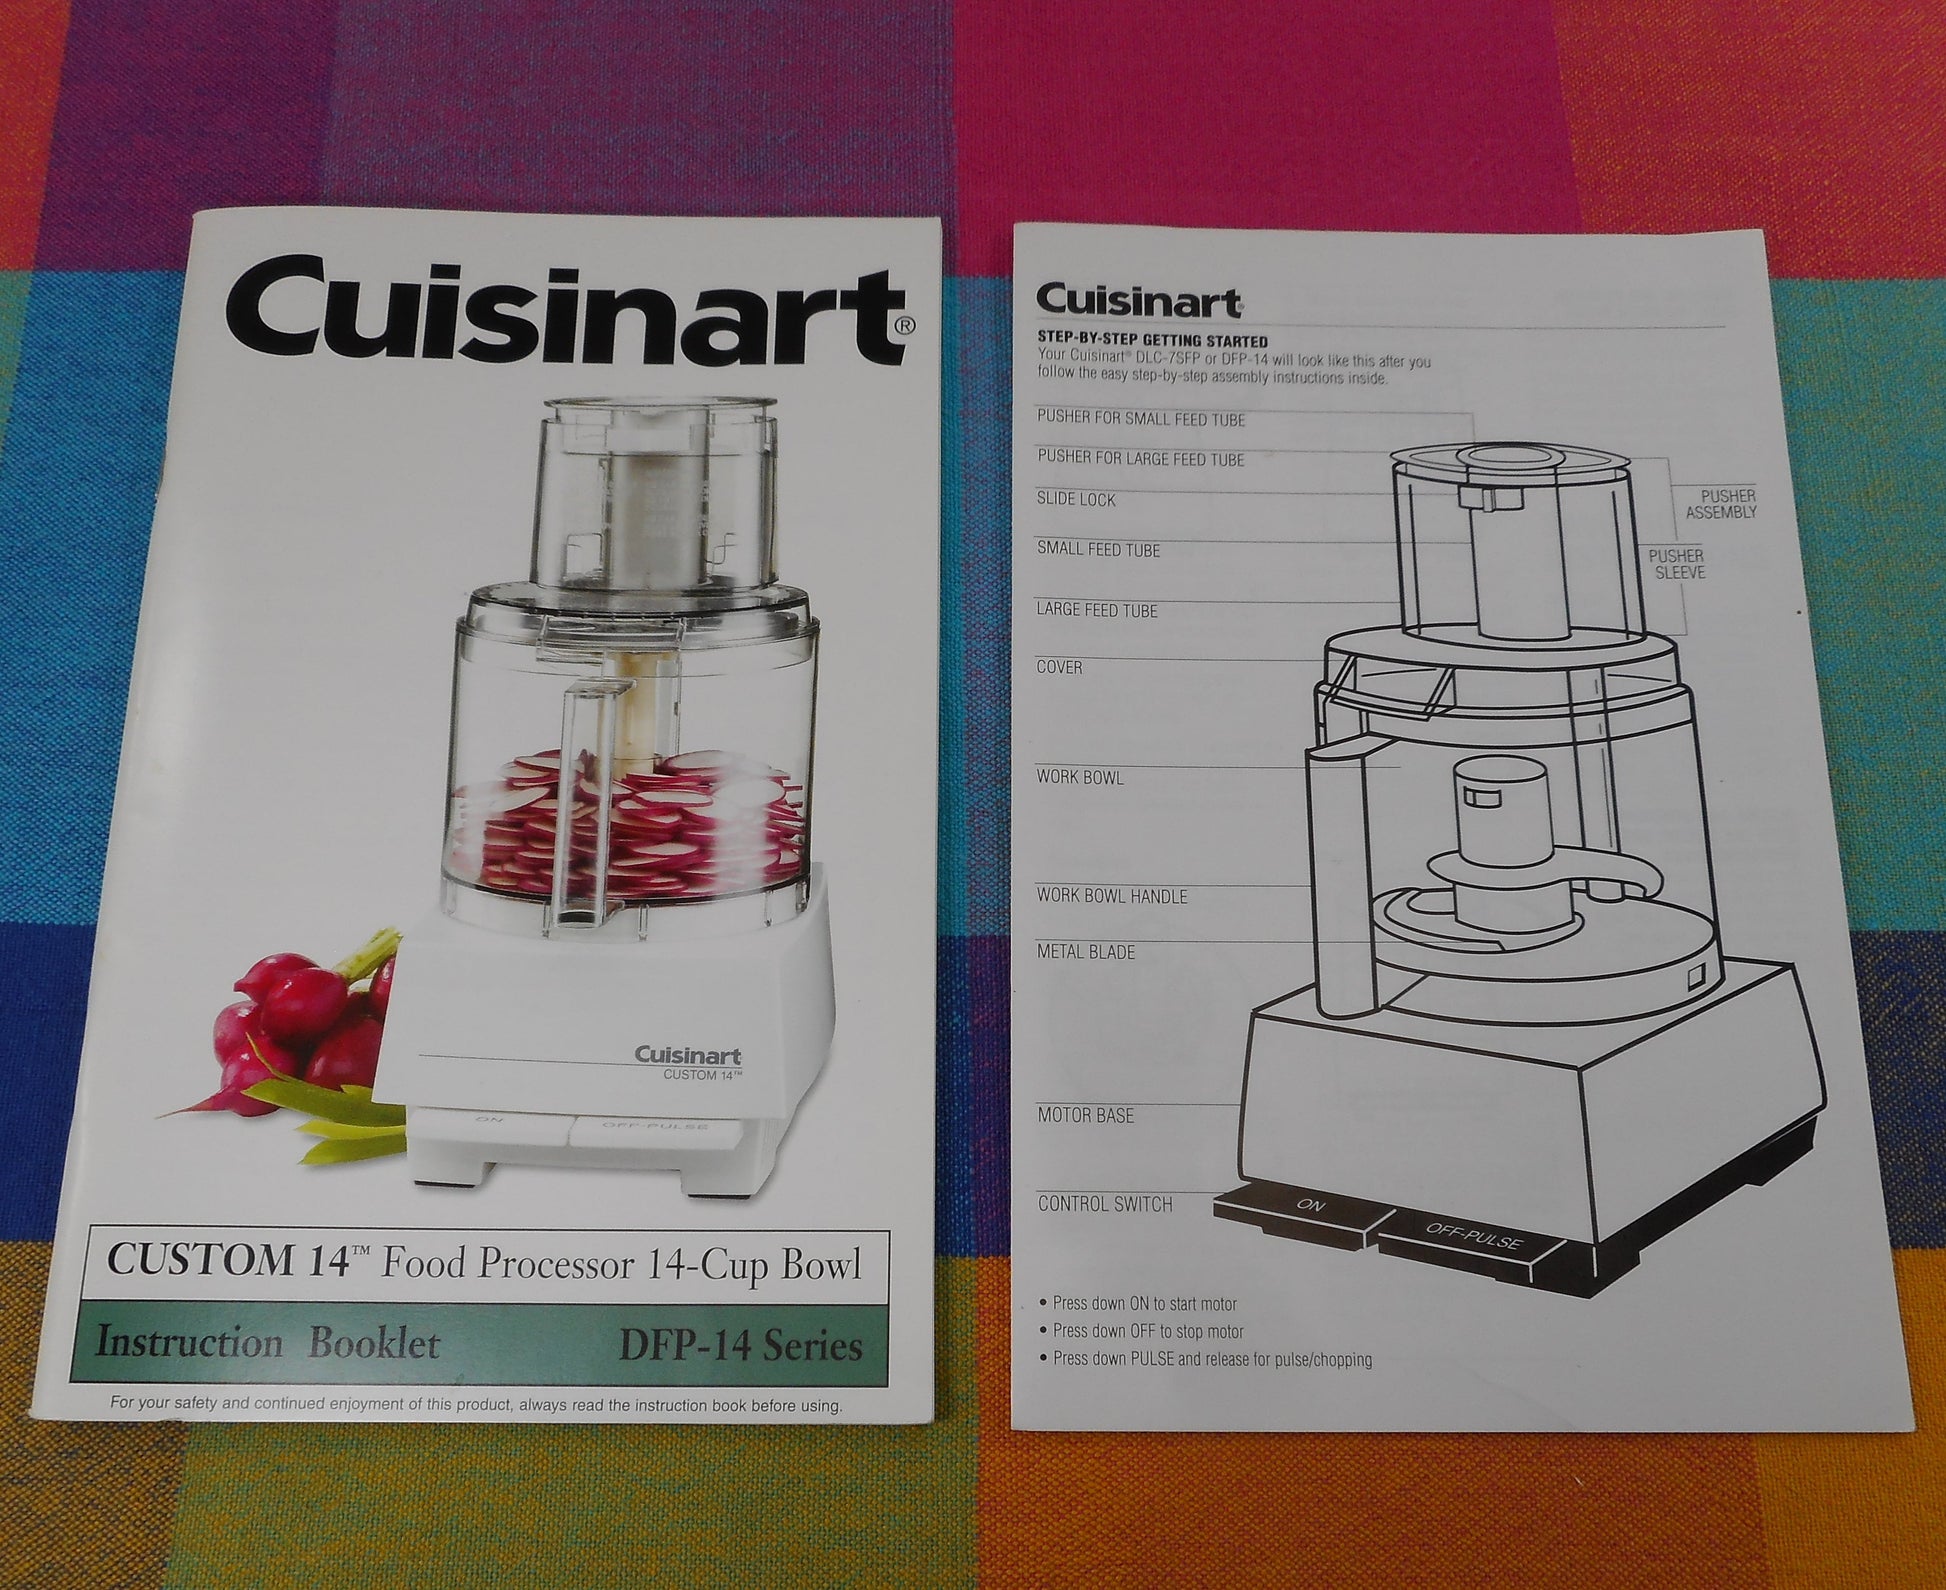 Cuisinart DLC-055 Whisk Attachment for DLC-7 Food Processors